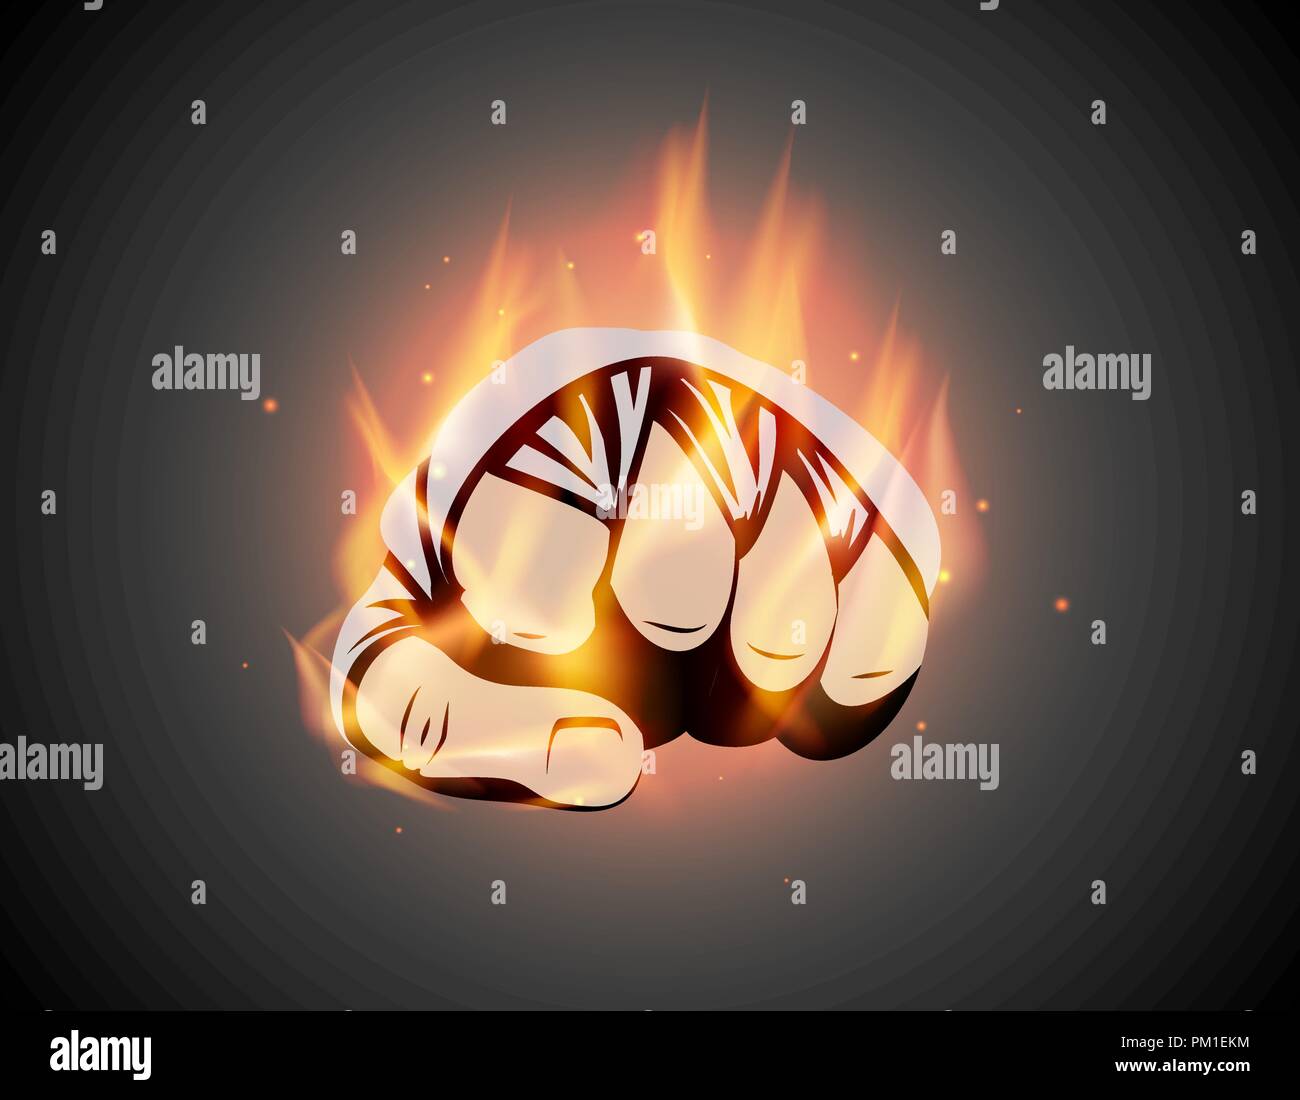 MMA or boxing burning bandage fist. Mixed martial arts fighting flame hand emblem or logo idea. Vector athletic symbol with fire. Stock Vector